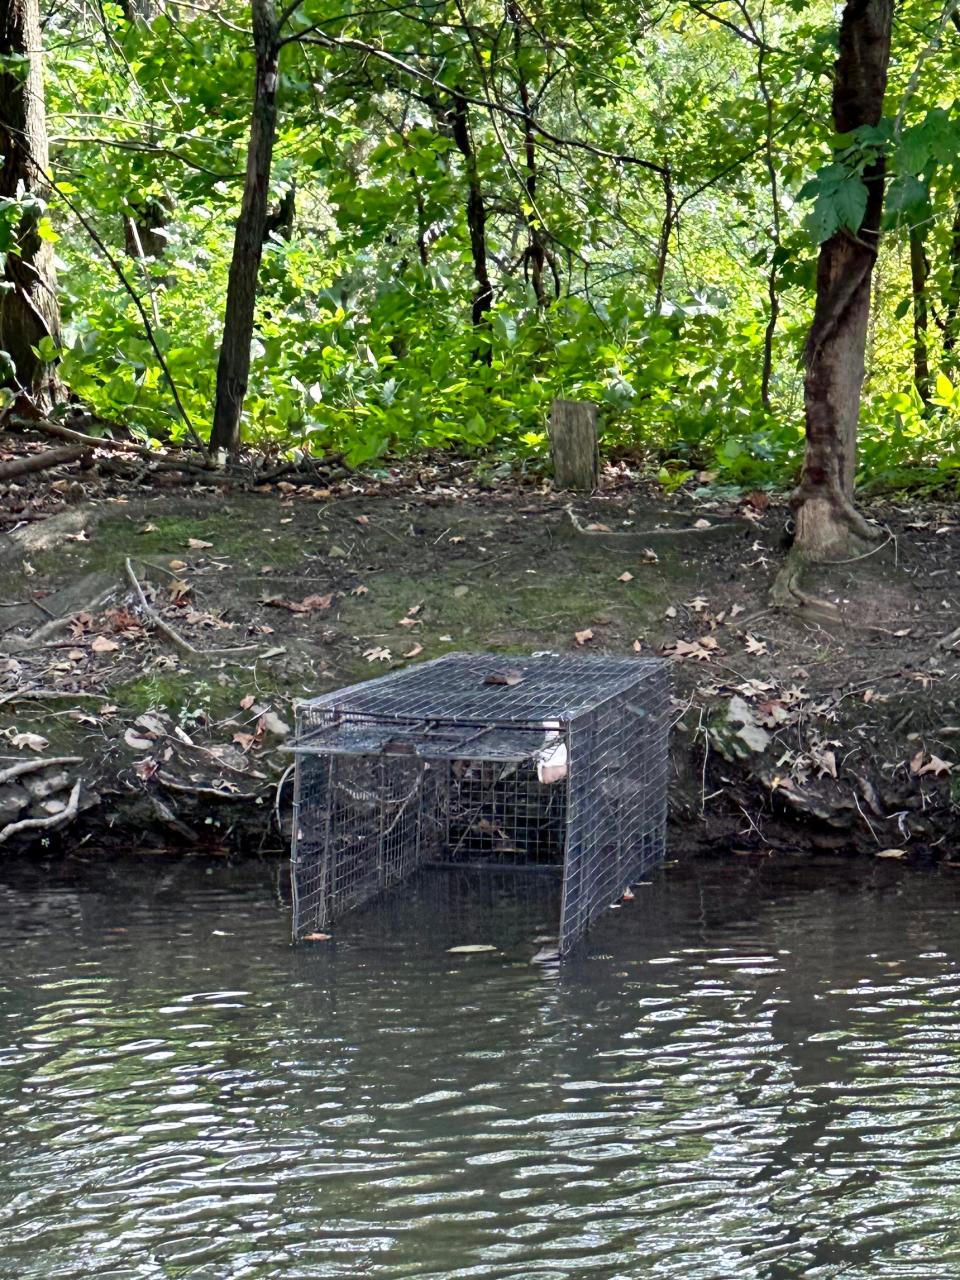 The New Jersey Department of Environmental Protection, Division of Fish & Wildlife deployed traps at Lake Creighton.